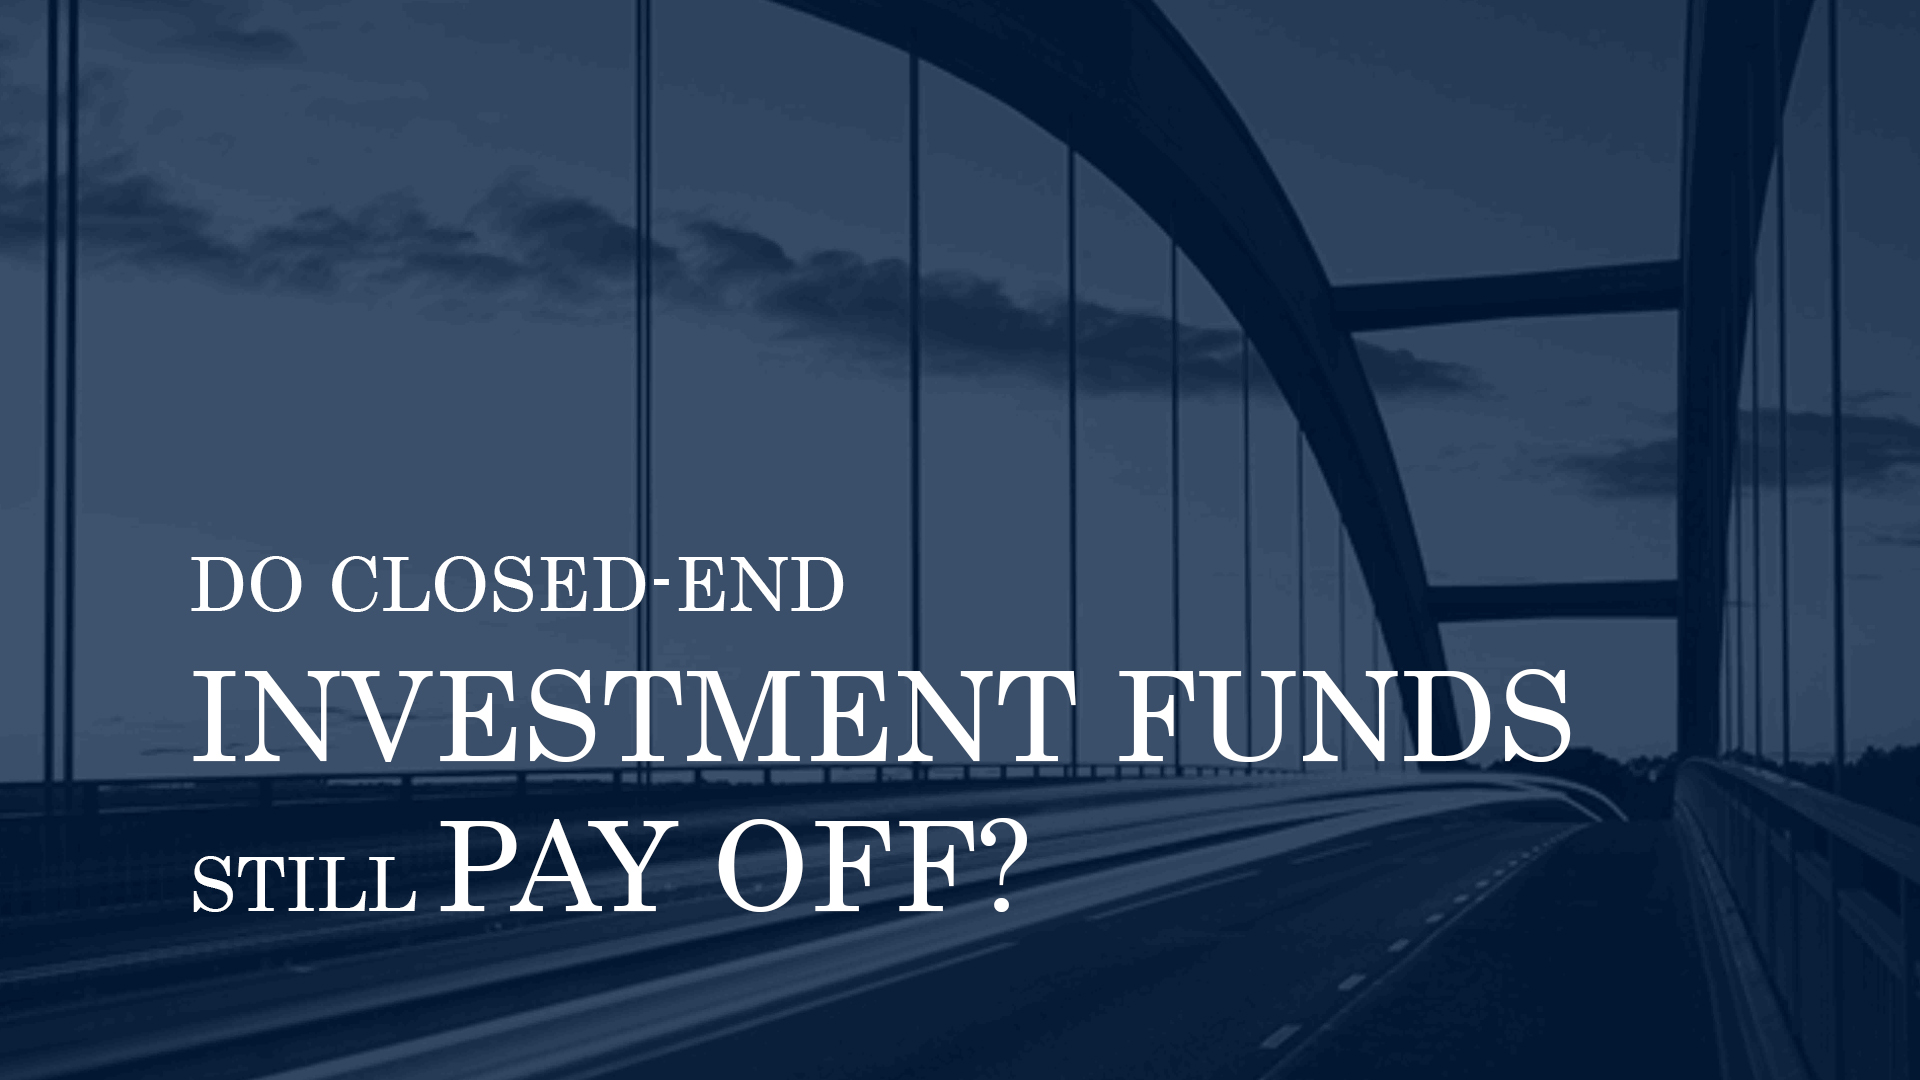 Panasiuk & Partners_DO CLOSED-END INVESTMENT FUNDS STILL PAY OFF?